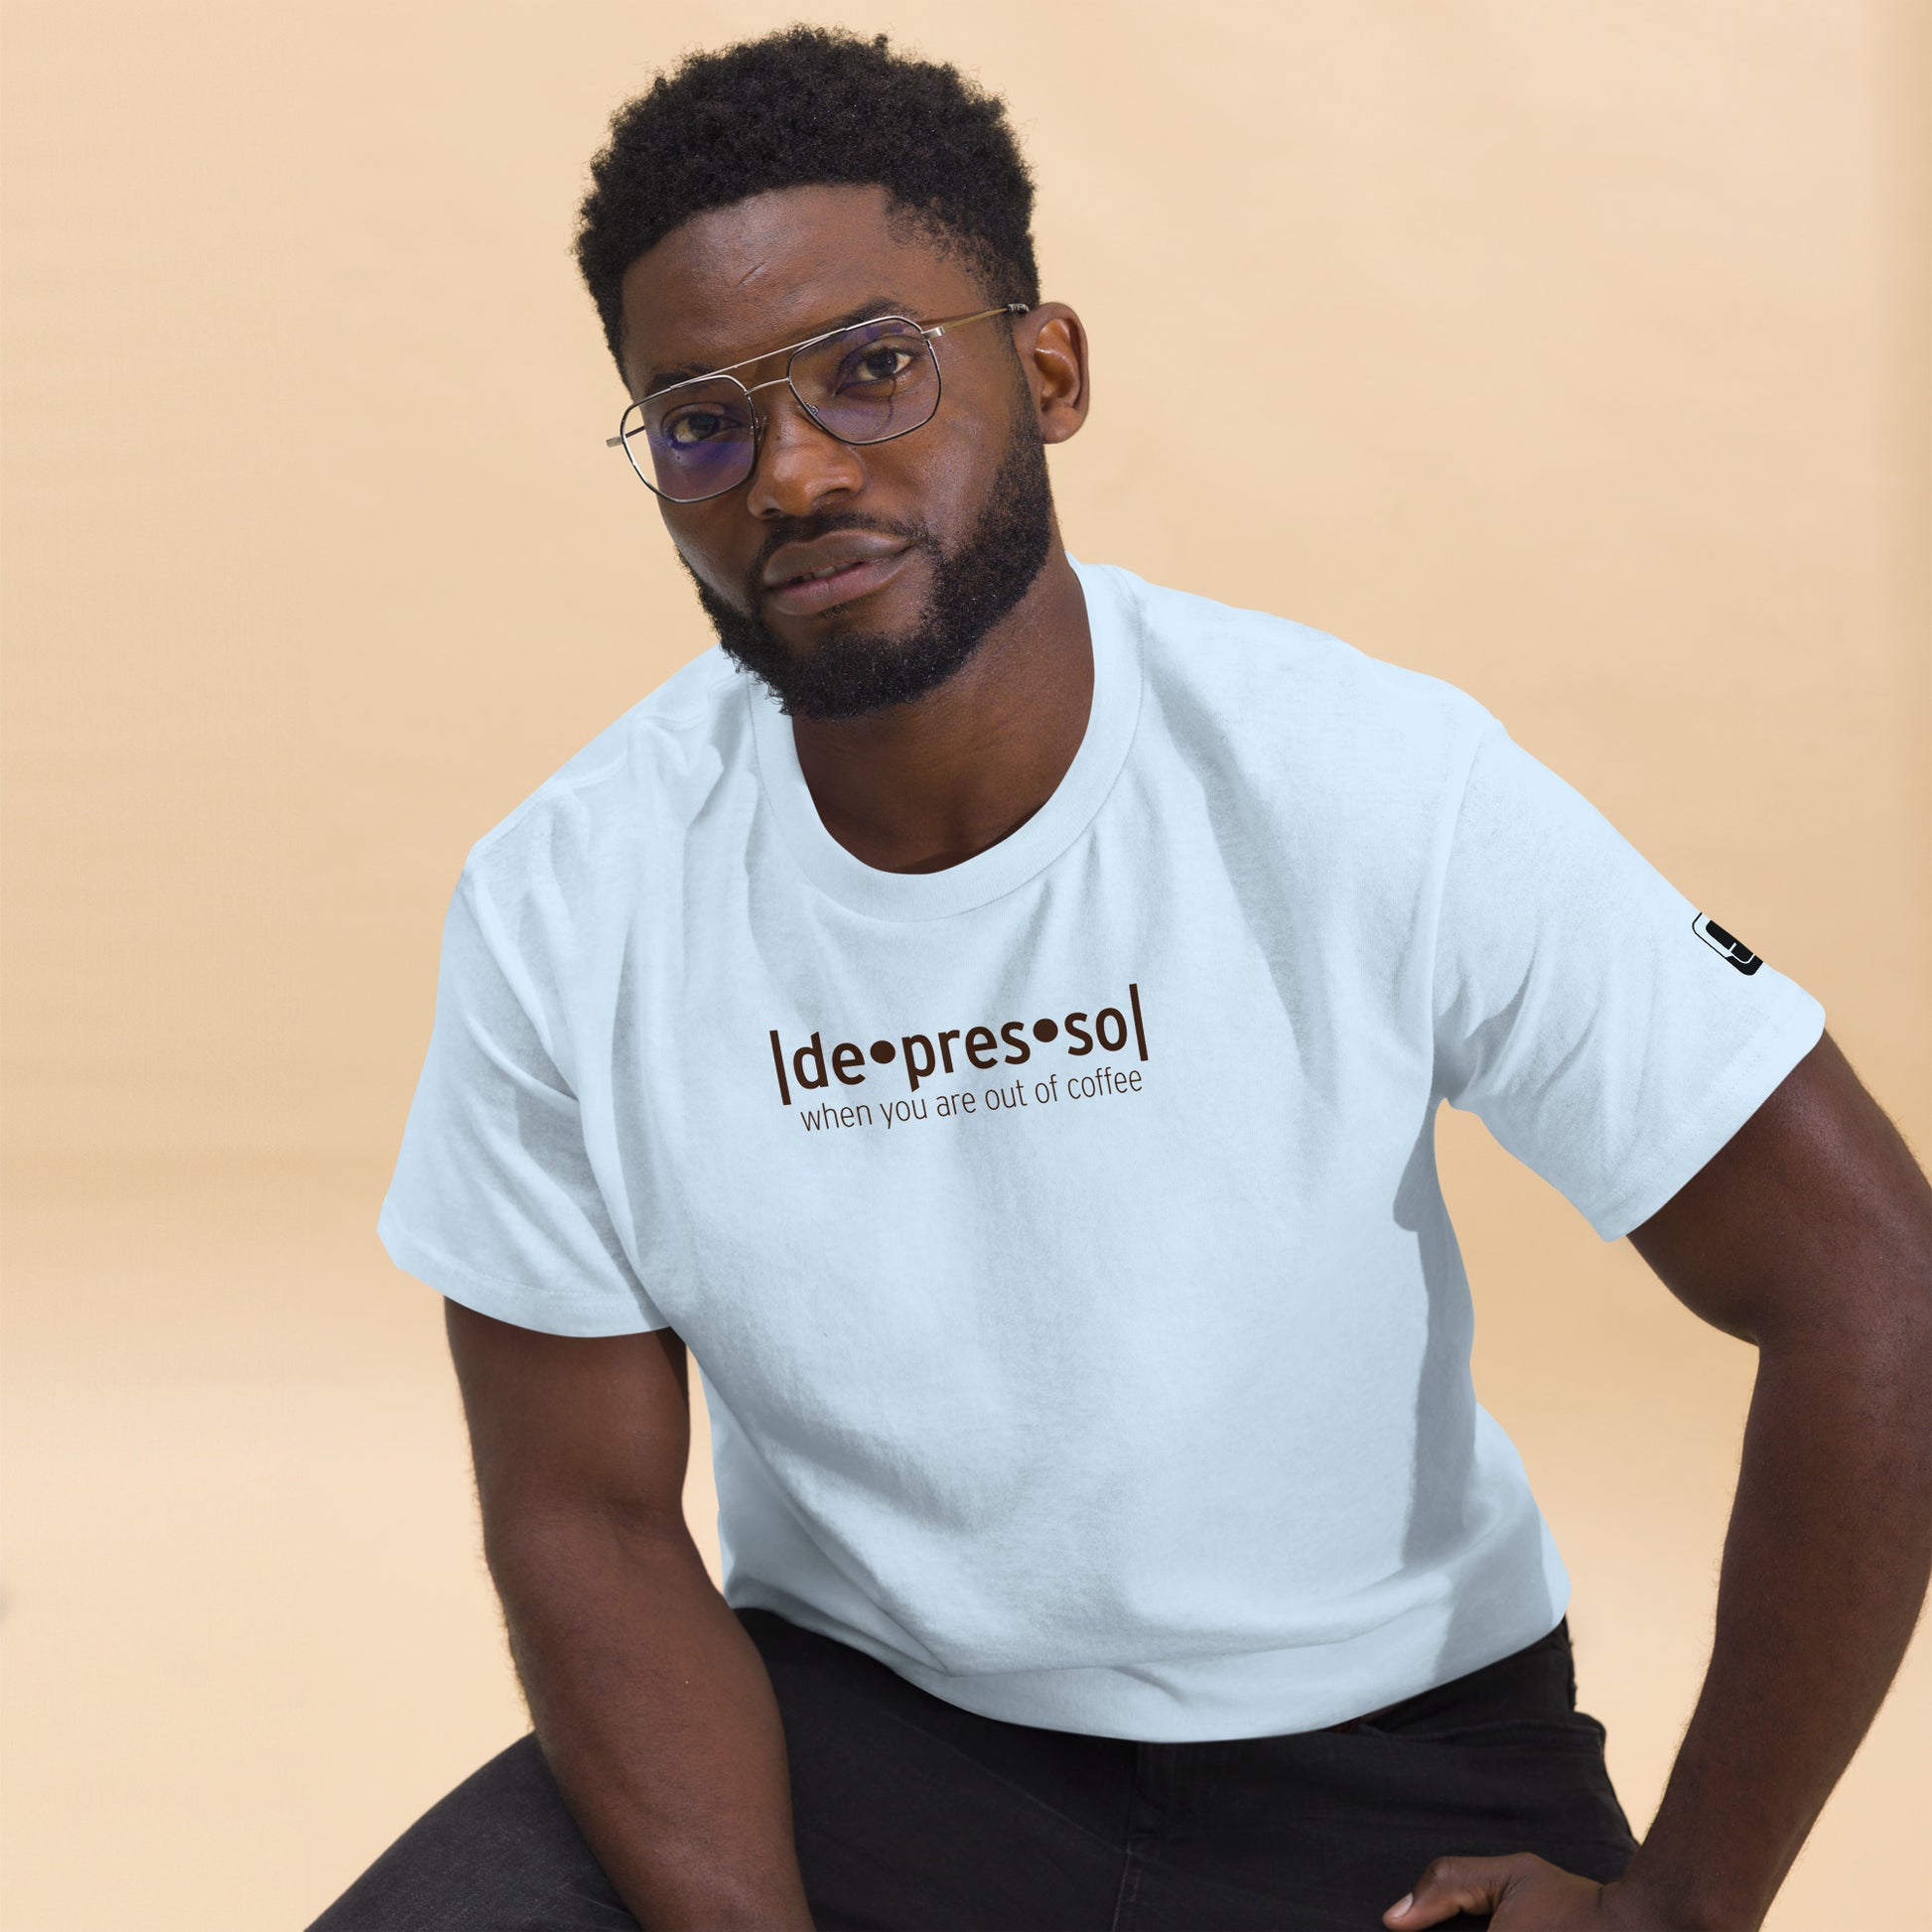 Man with glasses looking to the side, exuding a contemplative vibe, dressed in a light blue t-shirt with the witty phrase 'depresso' followed by 'when you are out of coffee', along with a logo patch on the sleeve, set against a soft beige background.